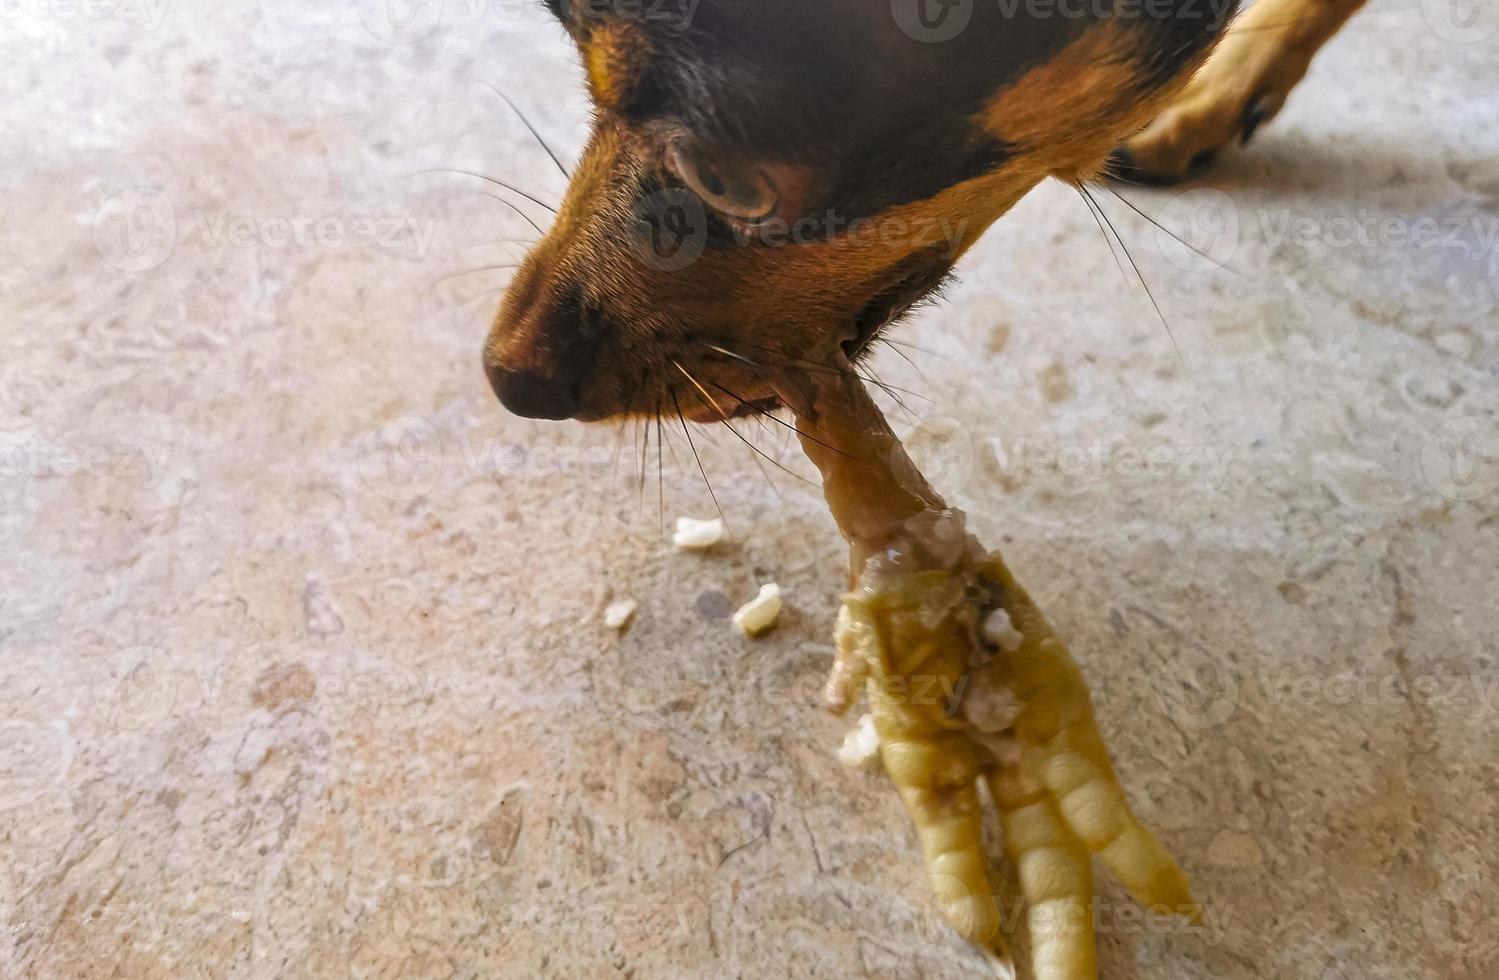 Dog eats and crunches chicken leg in Mexico. photo